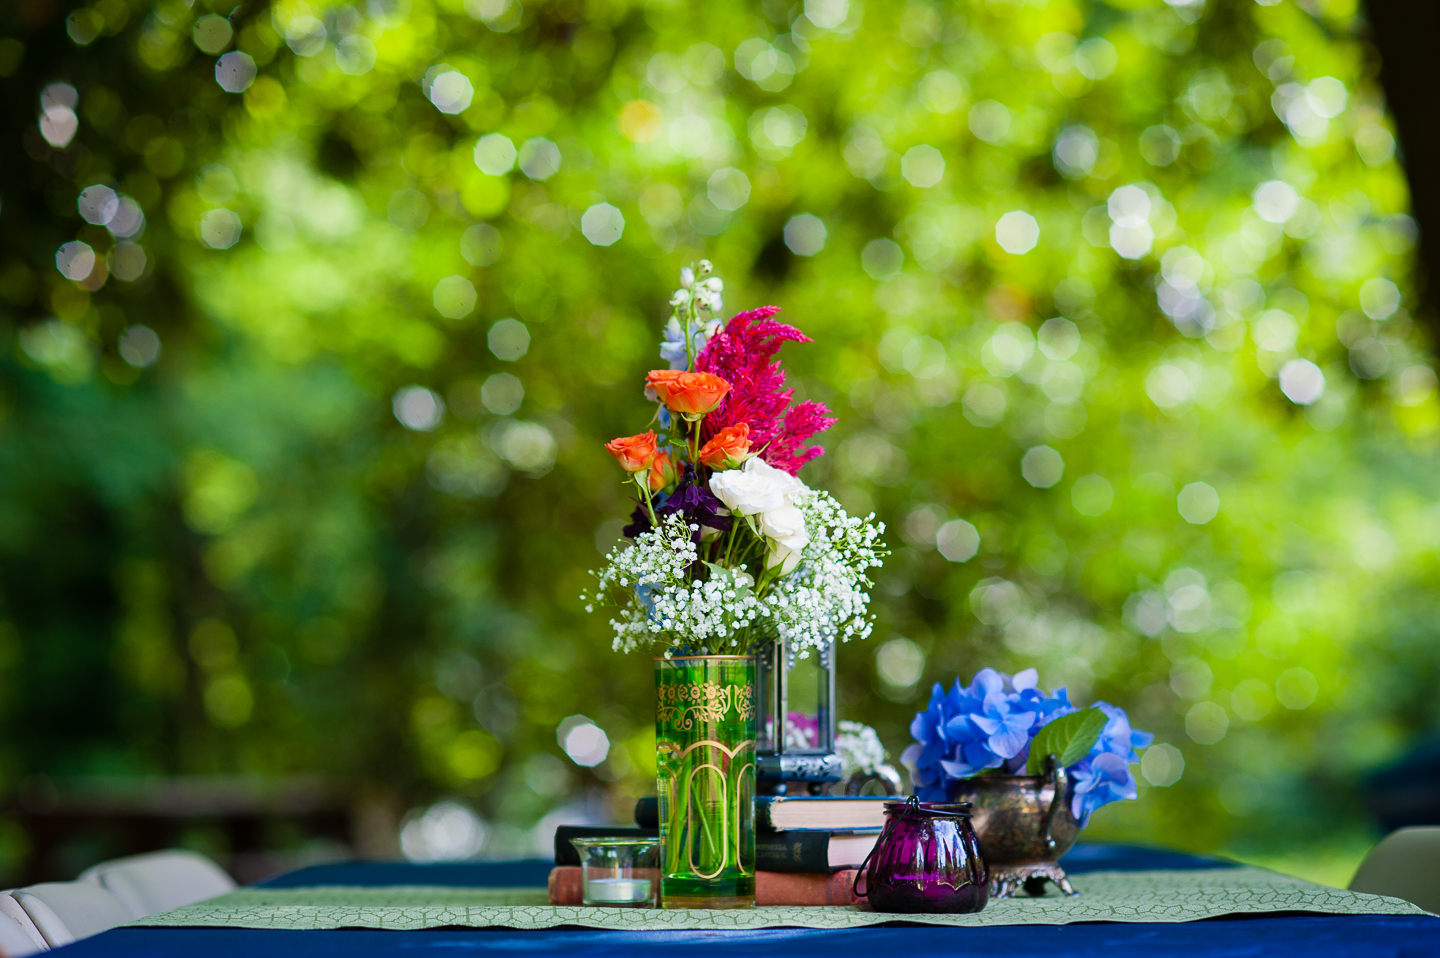 handpicked wildflowers with candles and books decorated the picnic tables during this crafty diy backyard asheville wedding